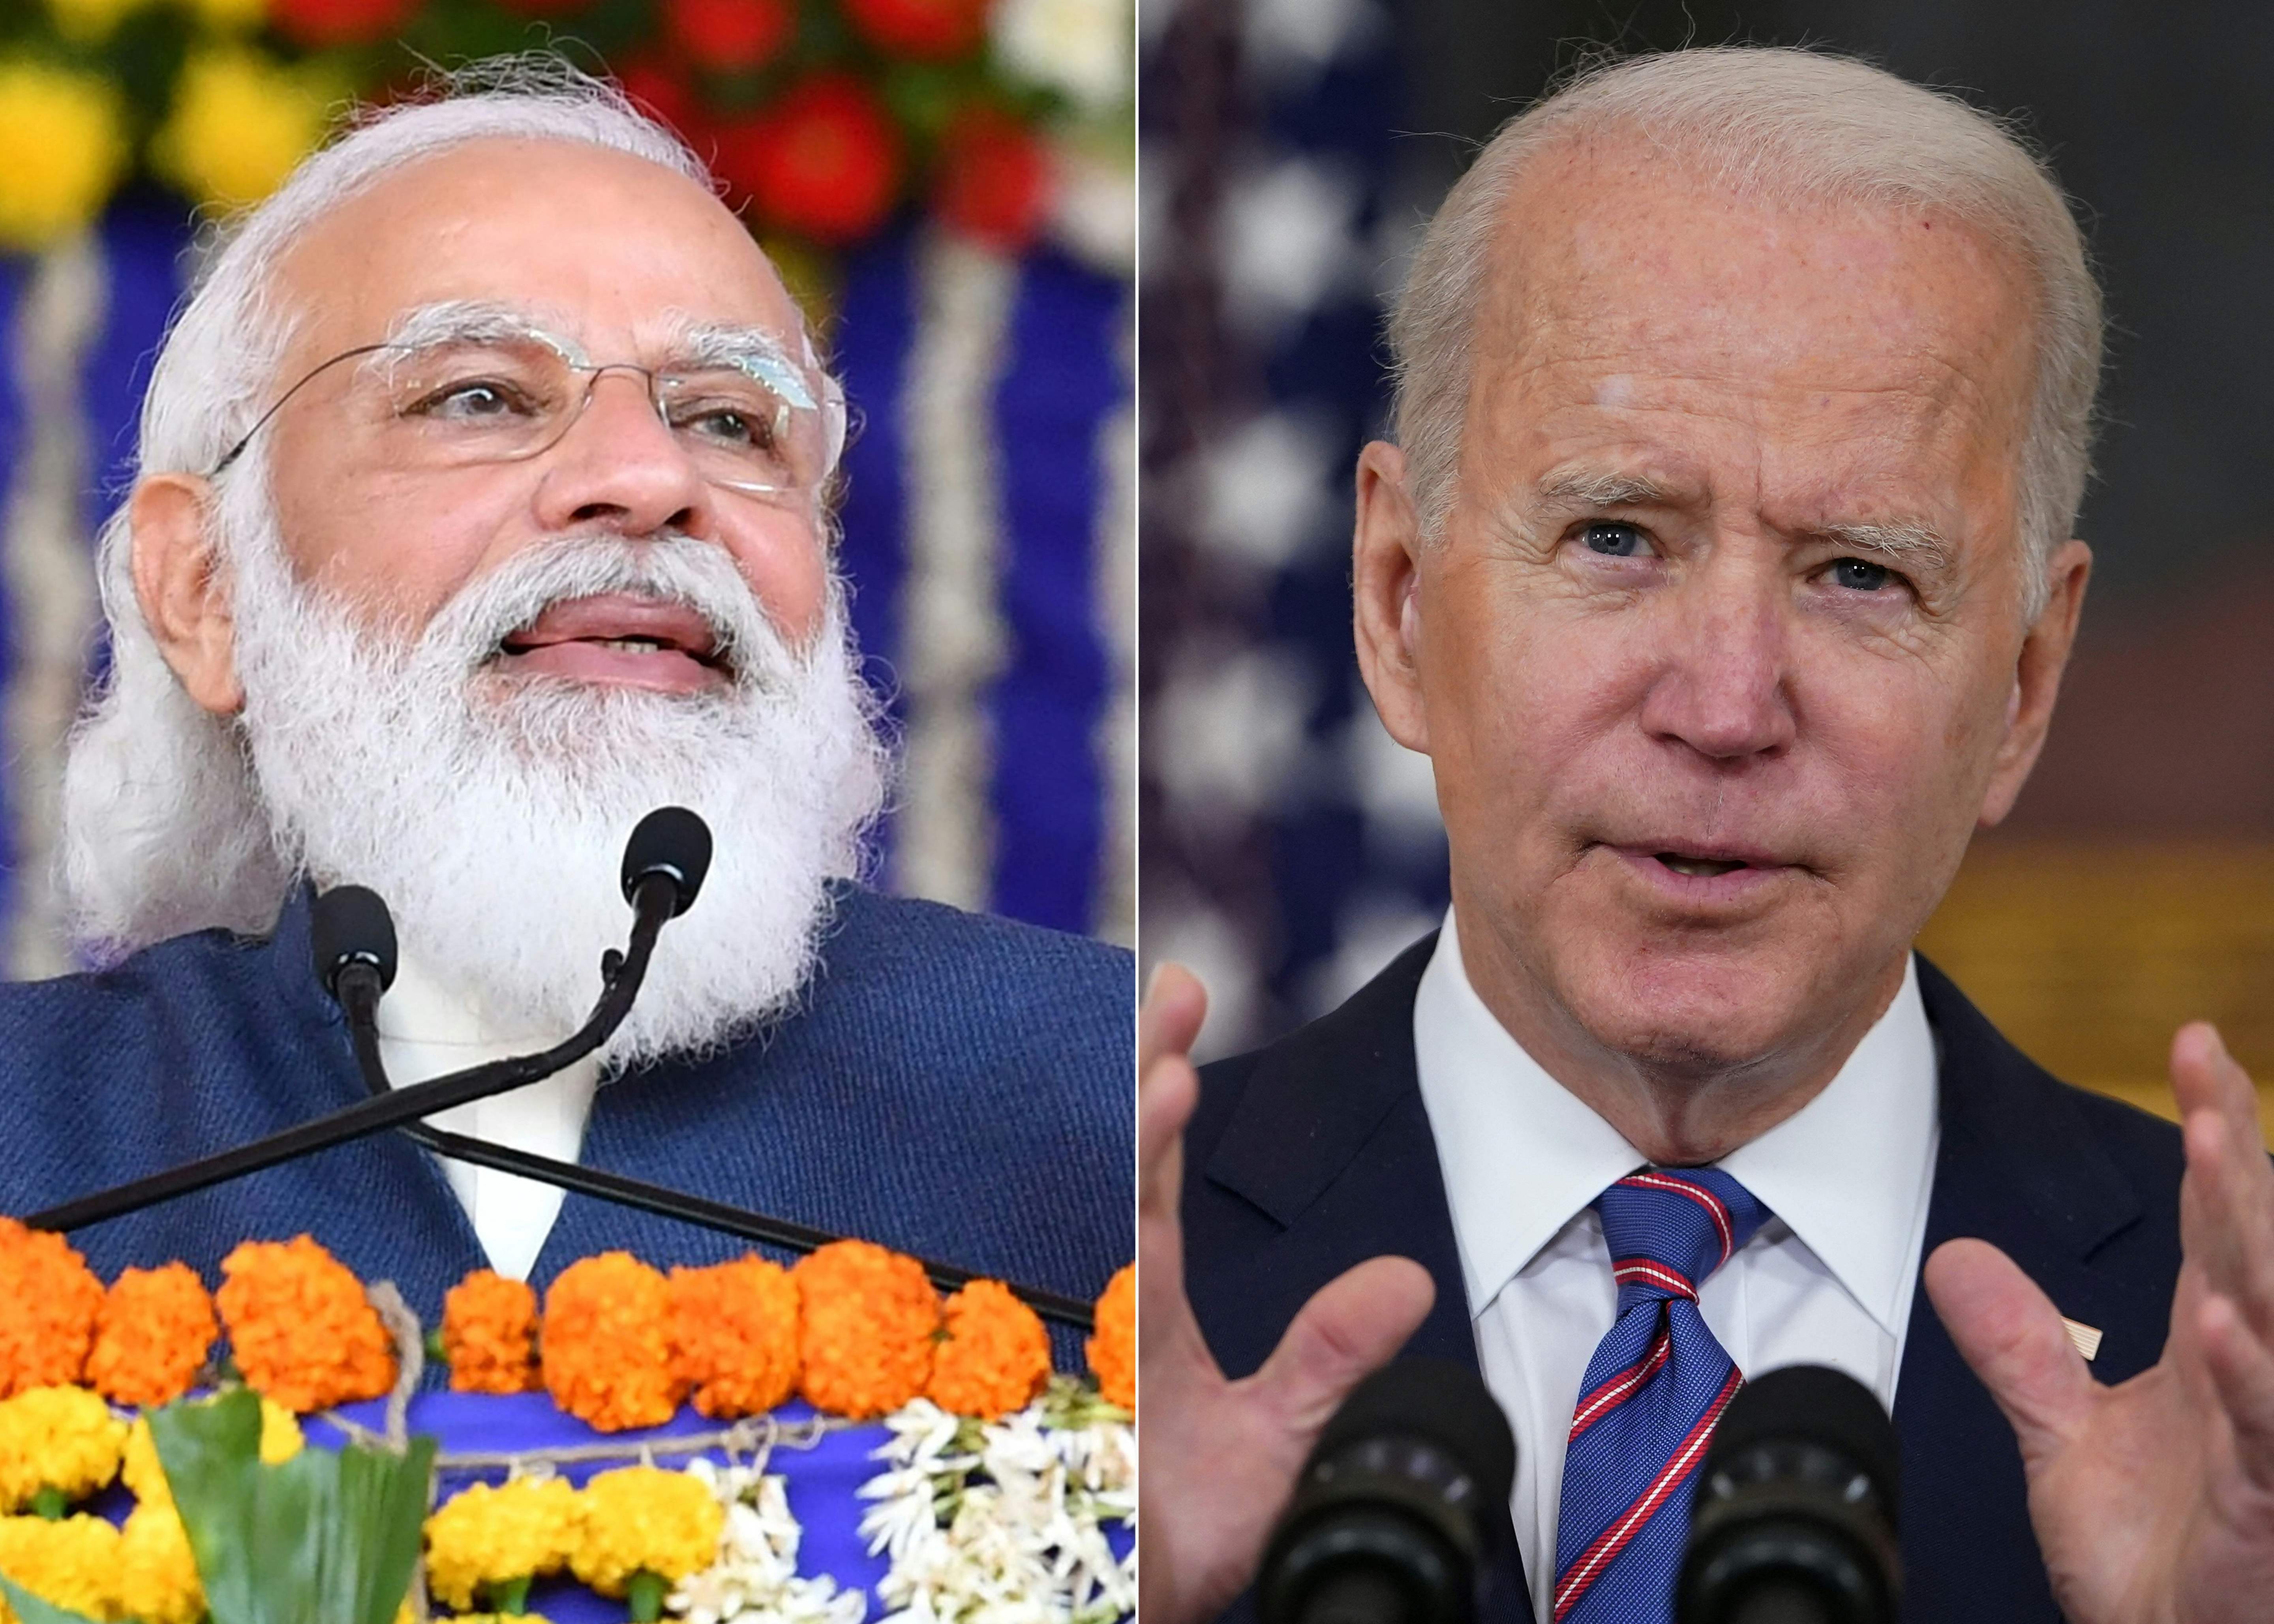 President Joe Biden has said he is sending “whole series” of help to India, including machinery to build vaccines